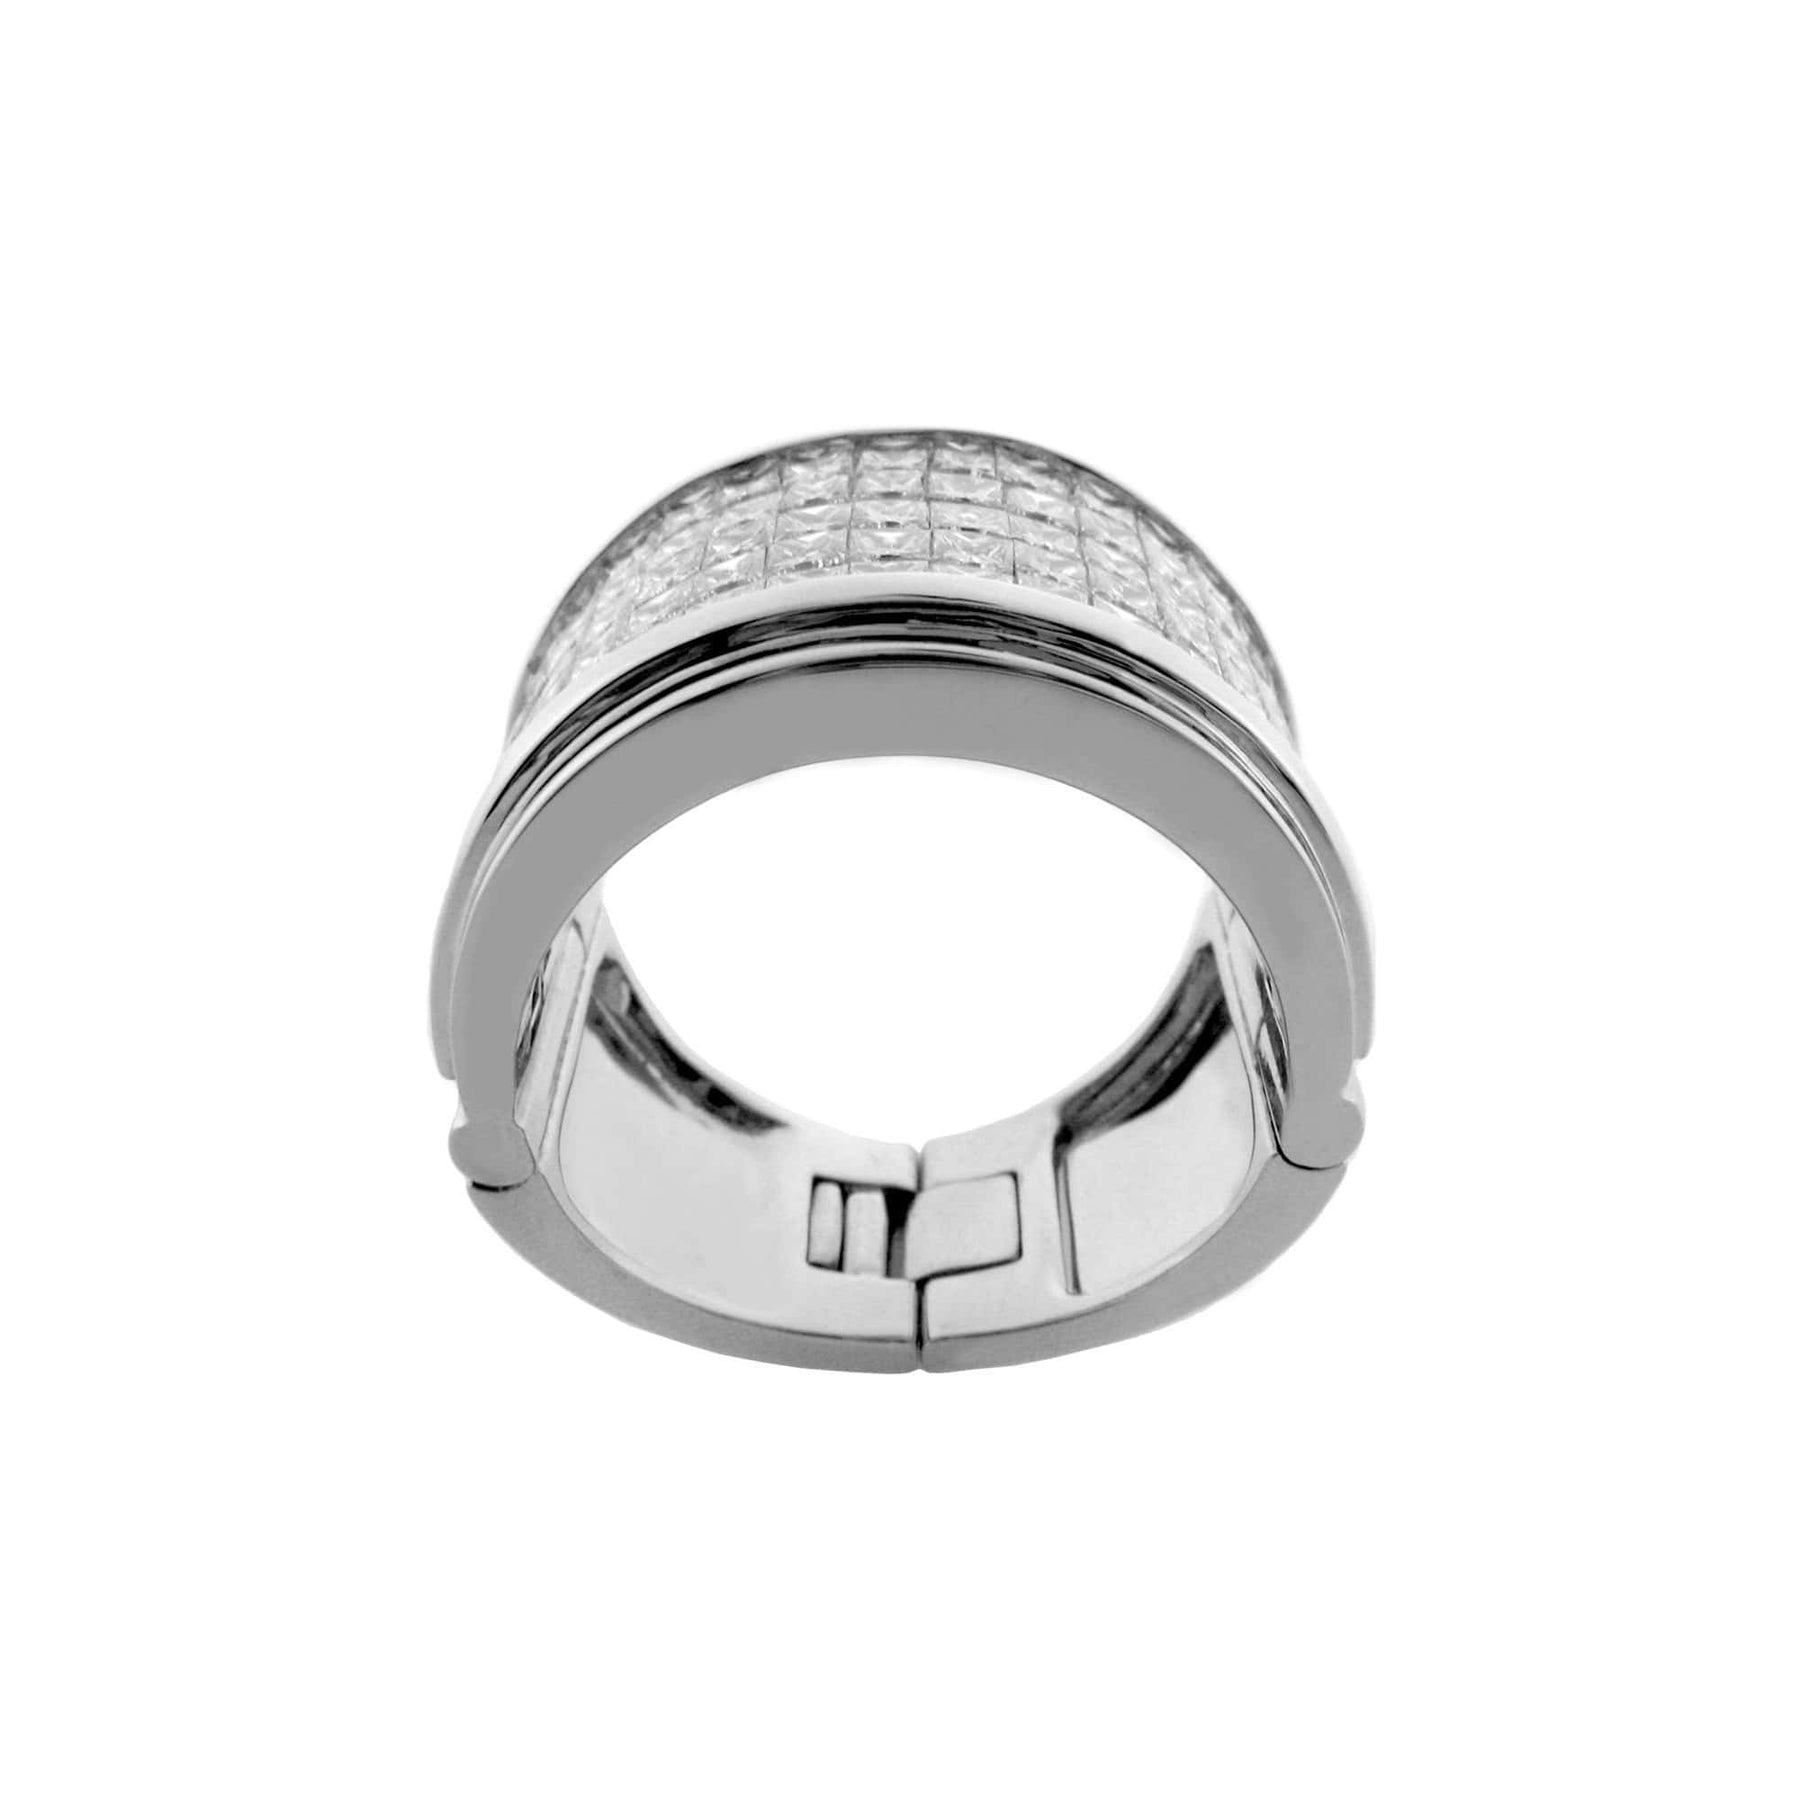 DIAMOND RING-BLING TALE - Chris Aire Fine Jewelry & Timepieces